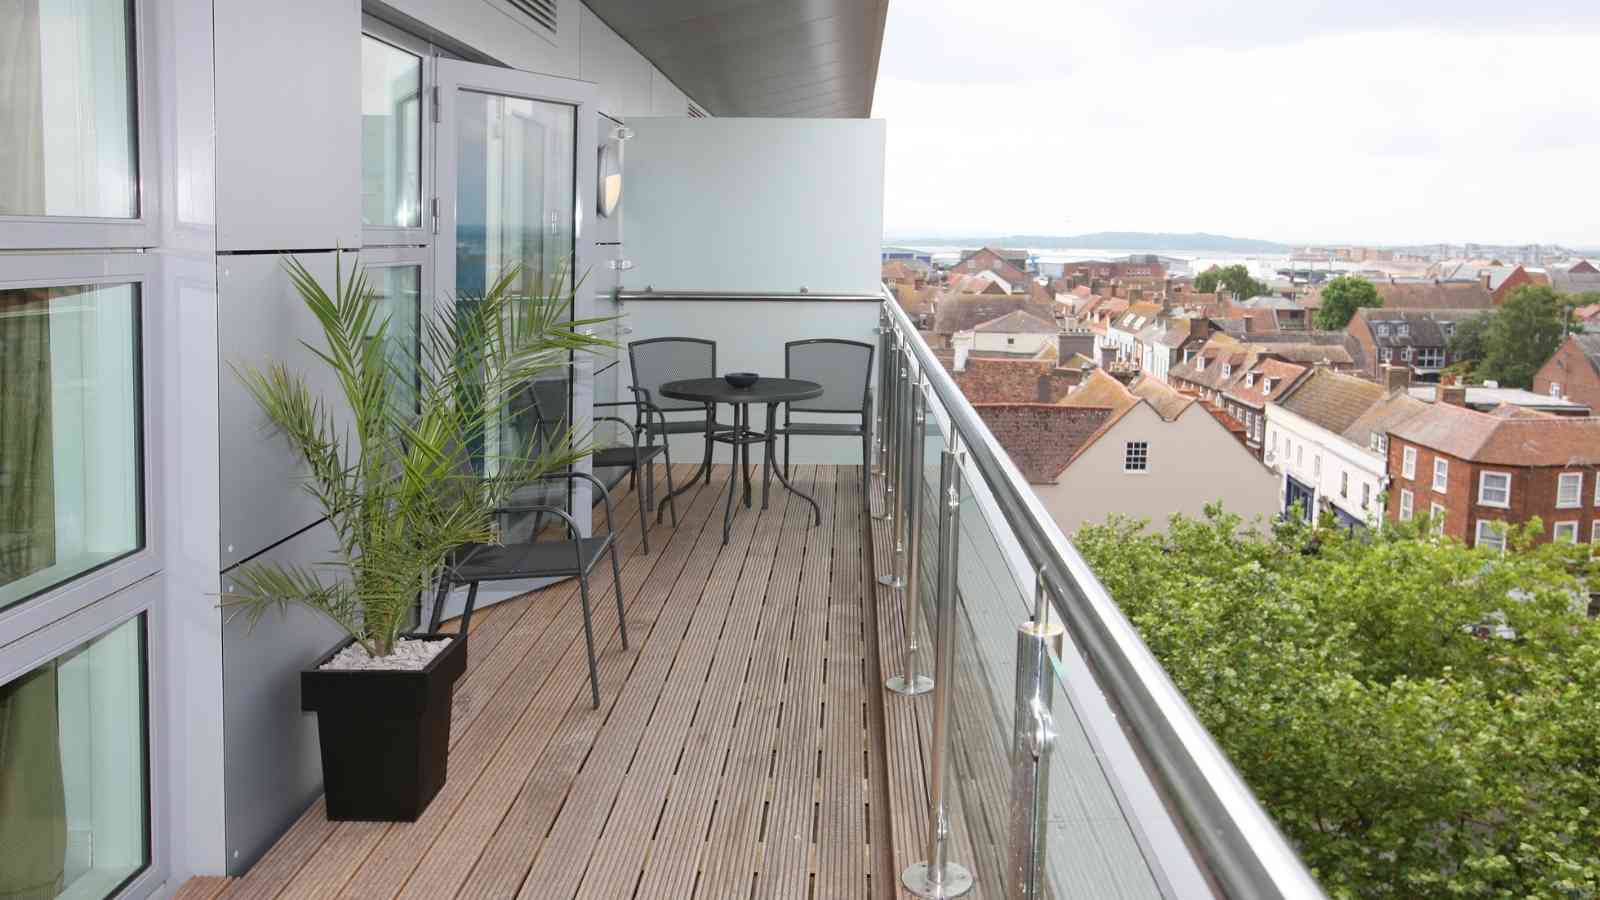 Apartment Balcony on a Budget